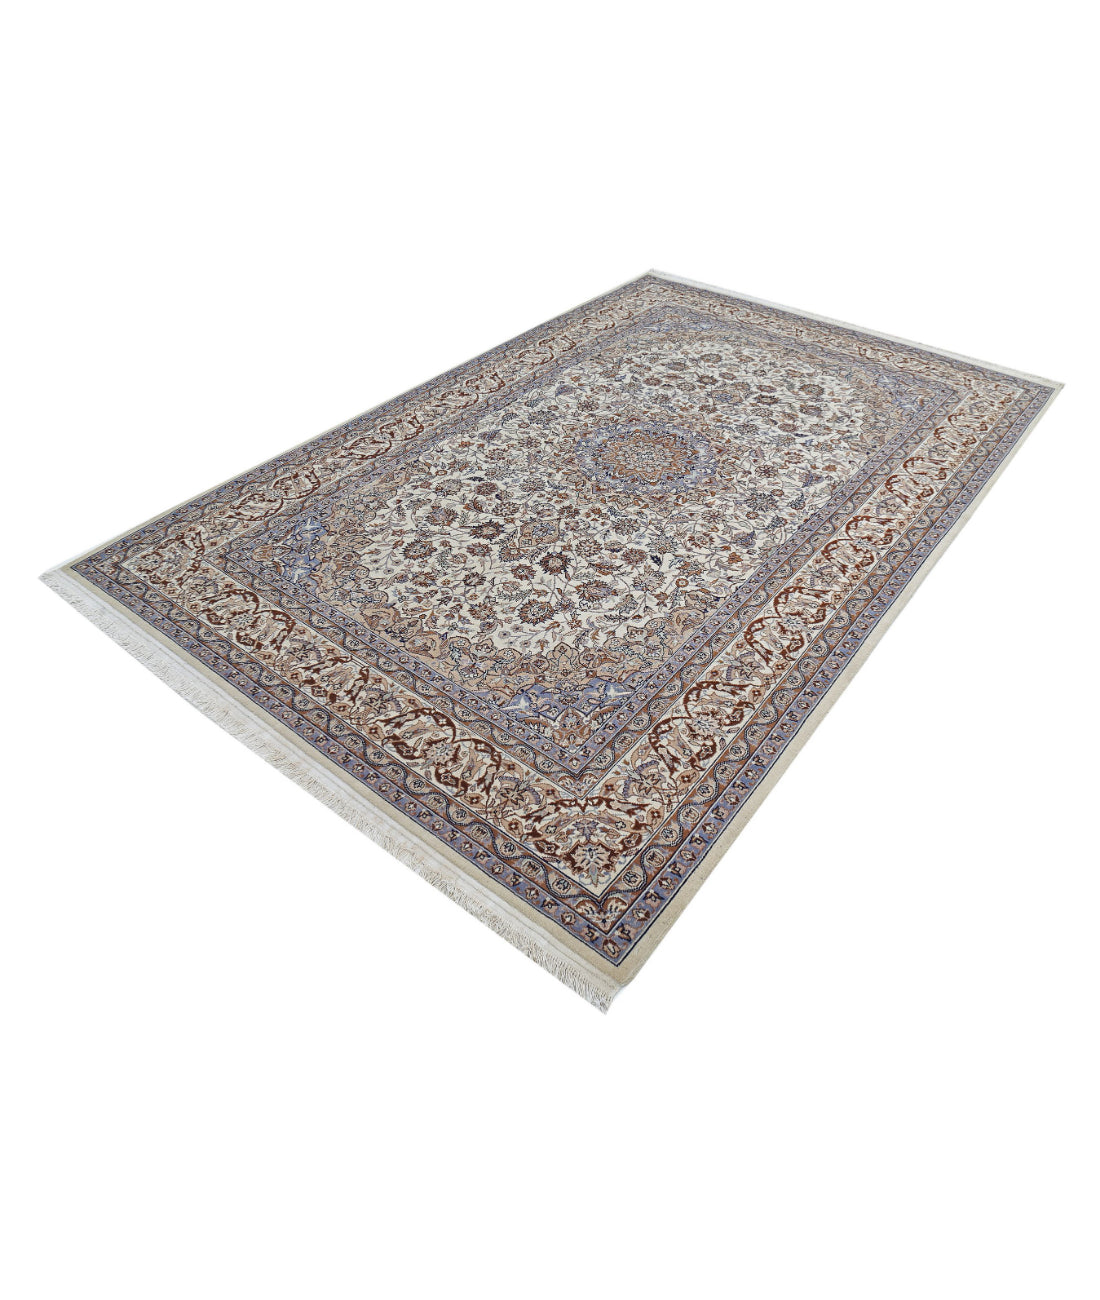 Hand Knotted Heritage Persian Style Wool Rug - 5'11'' x 9'0'' 5'11'' x 9'0'' (178 X 270) / Ivory / Taupe